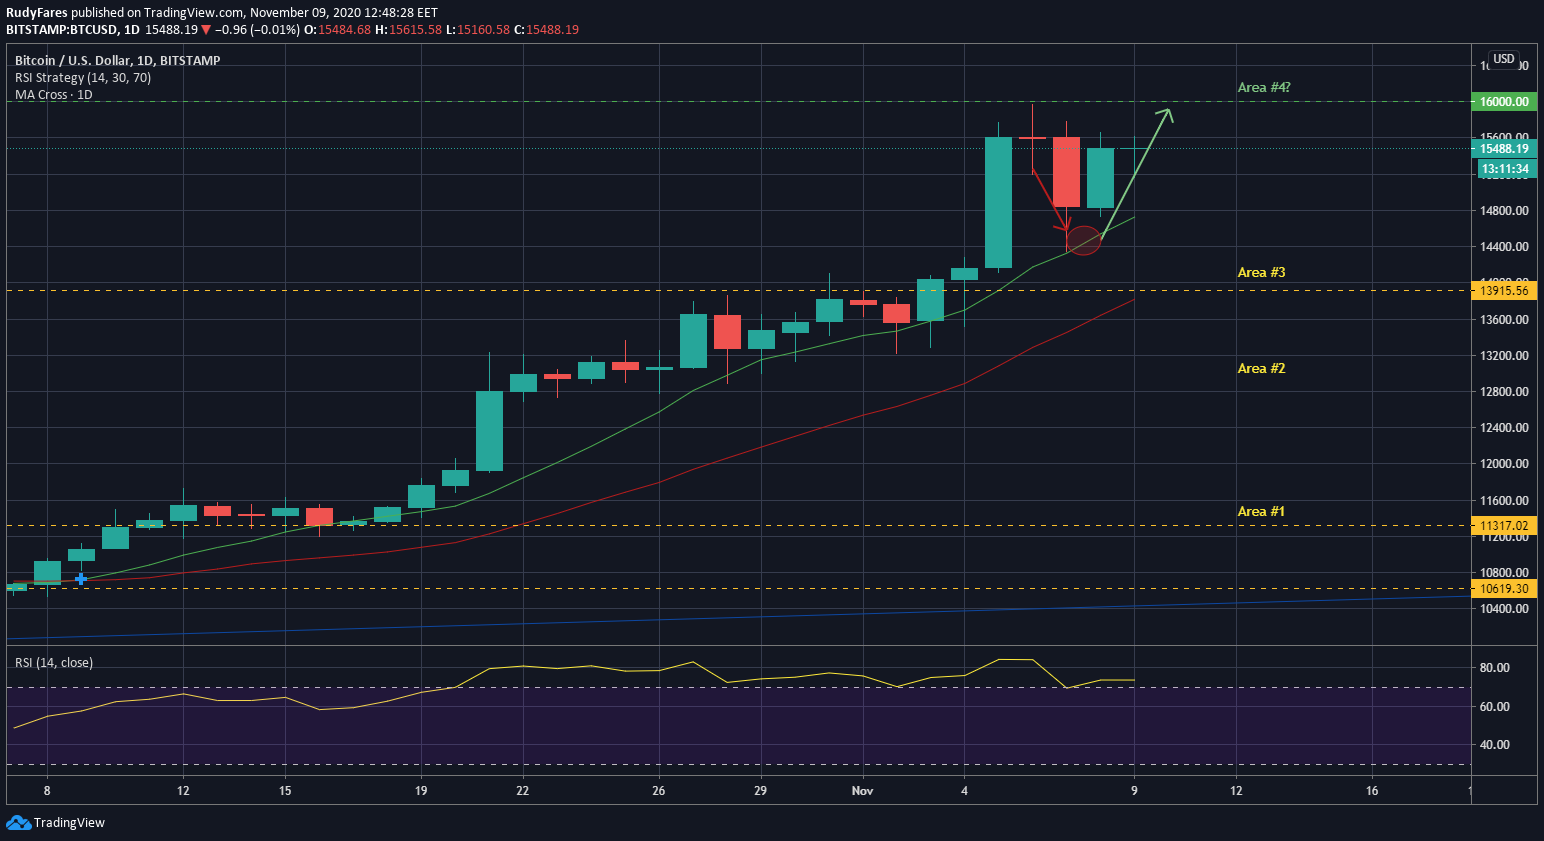 BTC/USD 1D chart – Weekend price-action in 2020